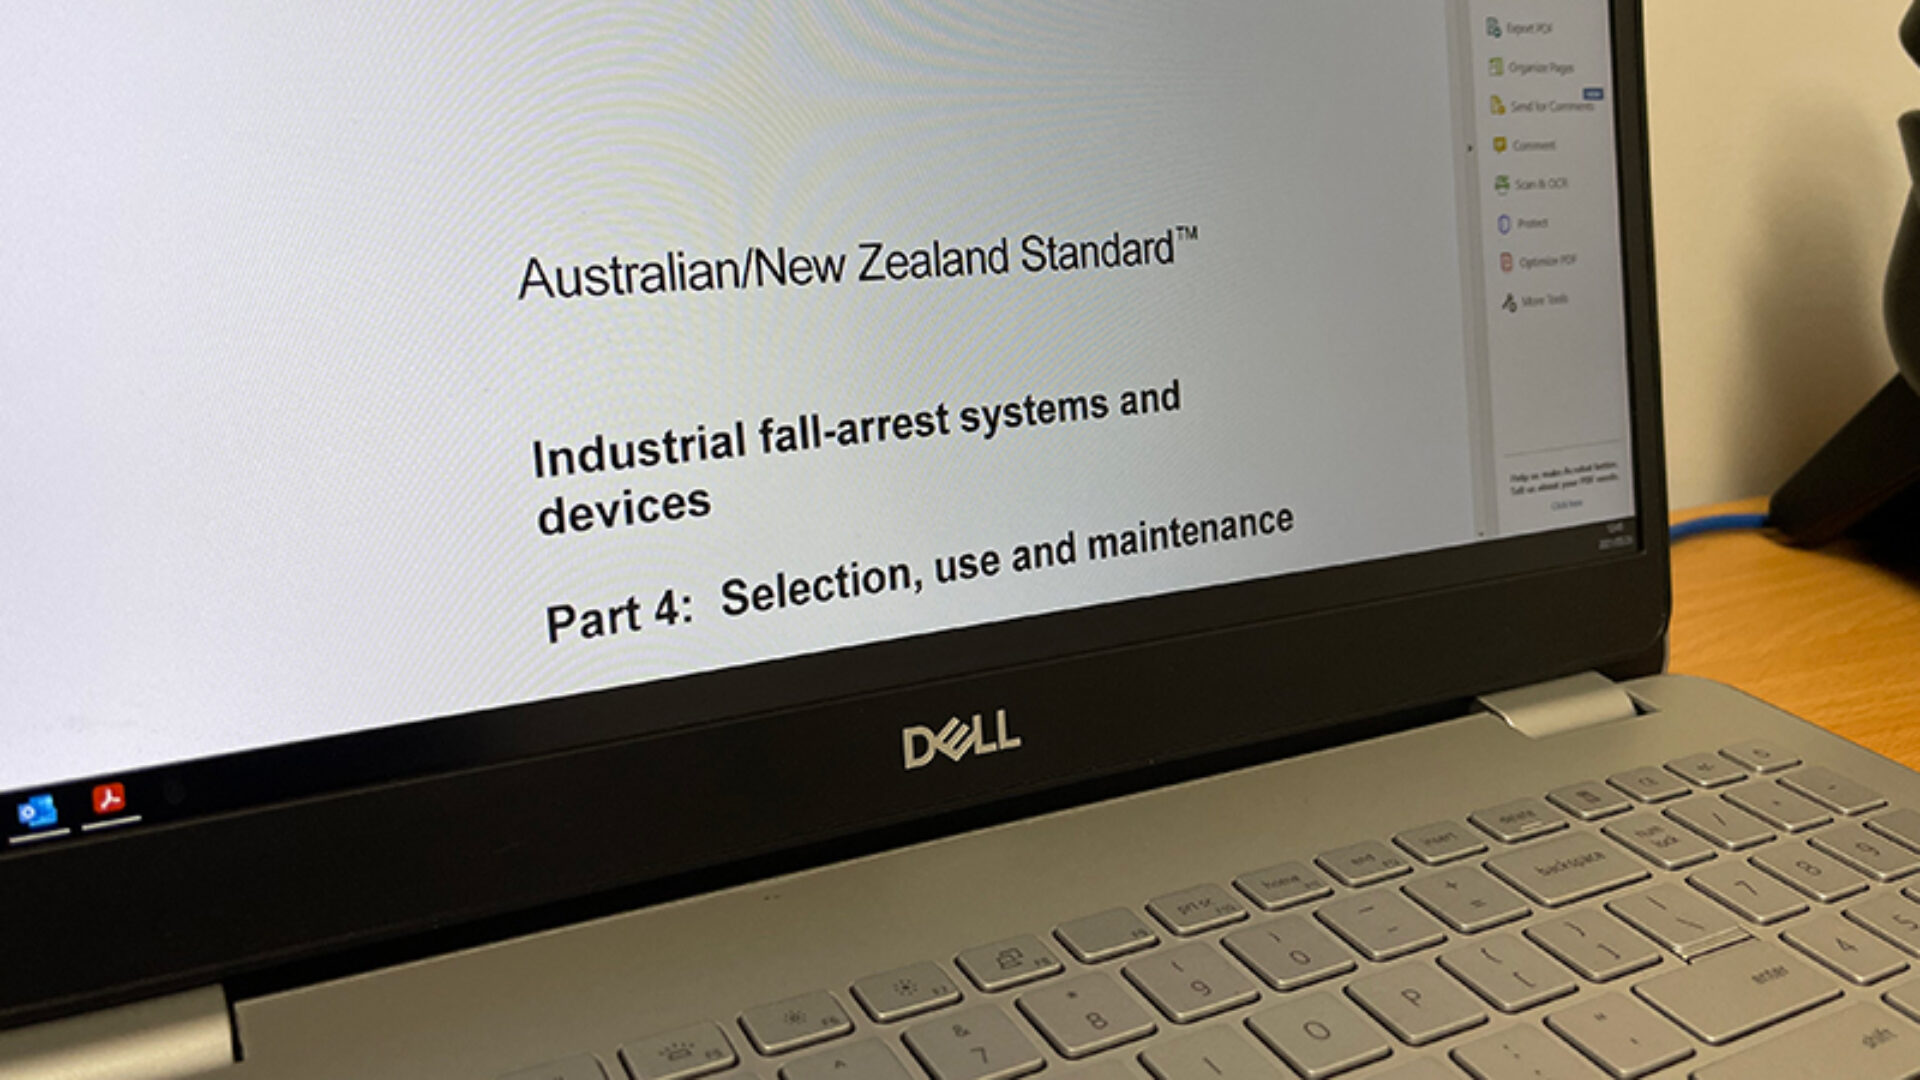 Computer screen showing the cover page of an Australian standard.